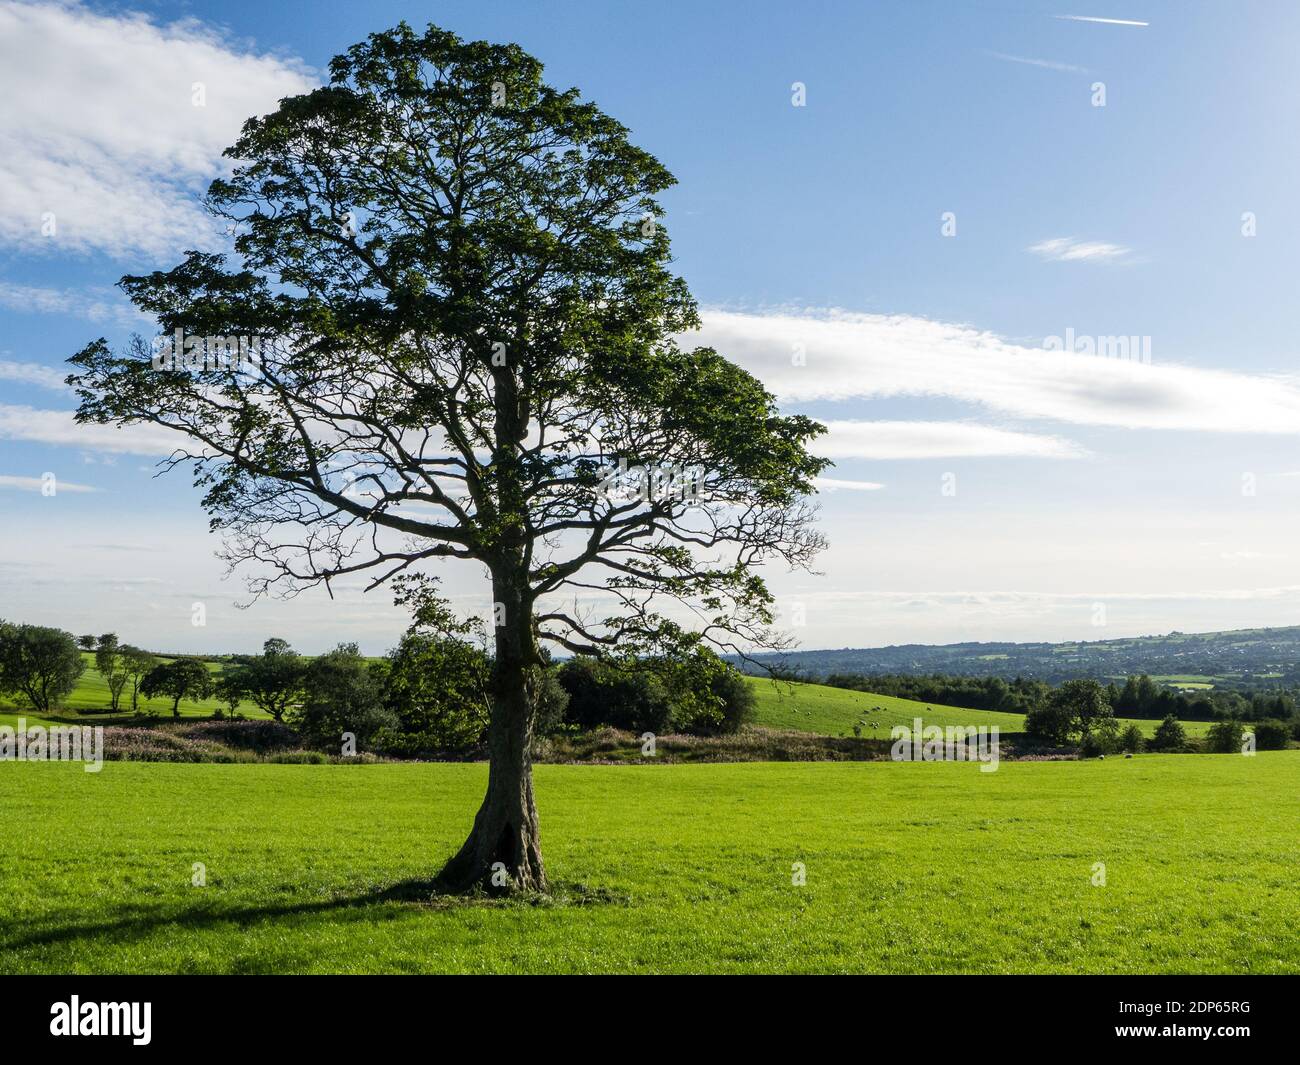 Solitary tree in field Stock Photo